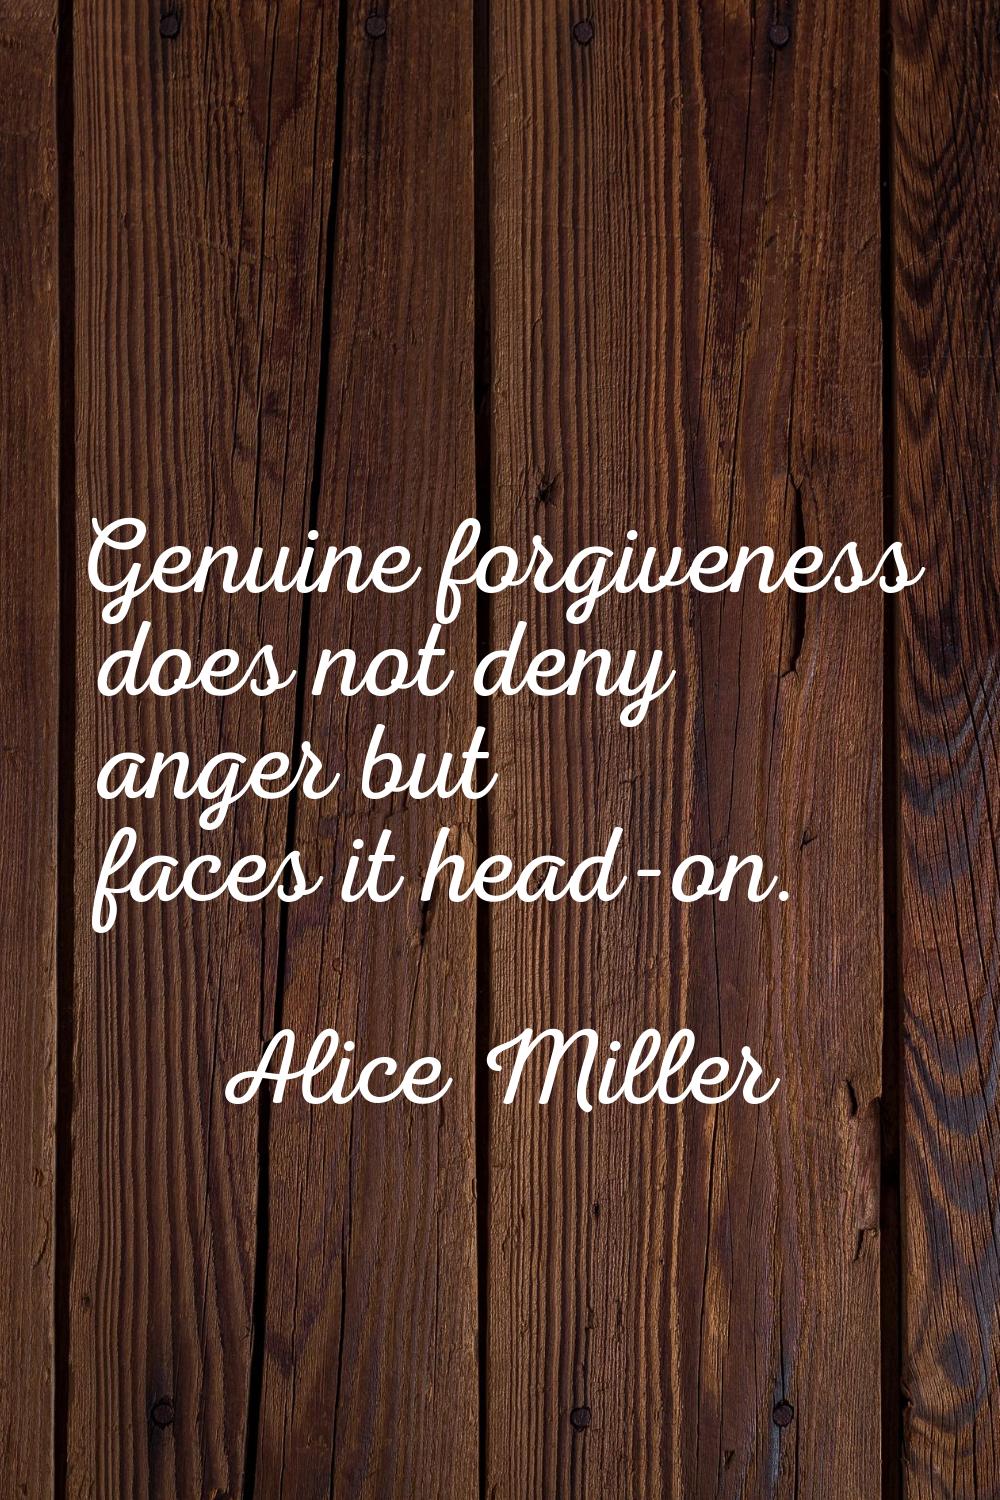 Genuine forgiveness does not deny anger but faces it head-on.